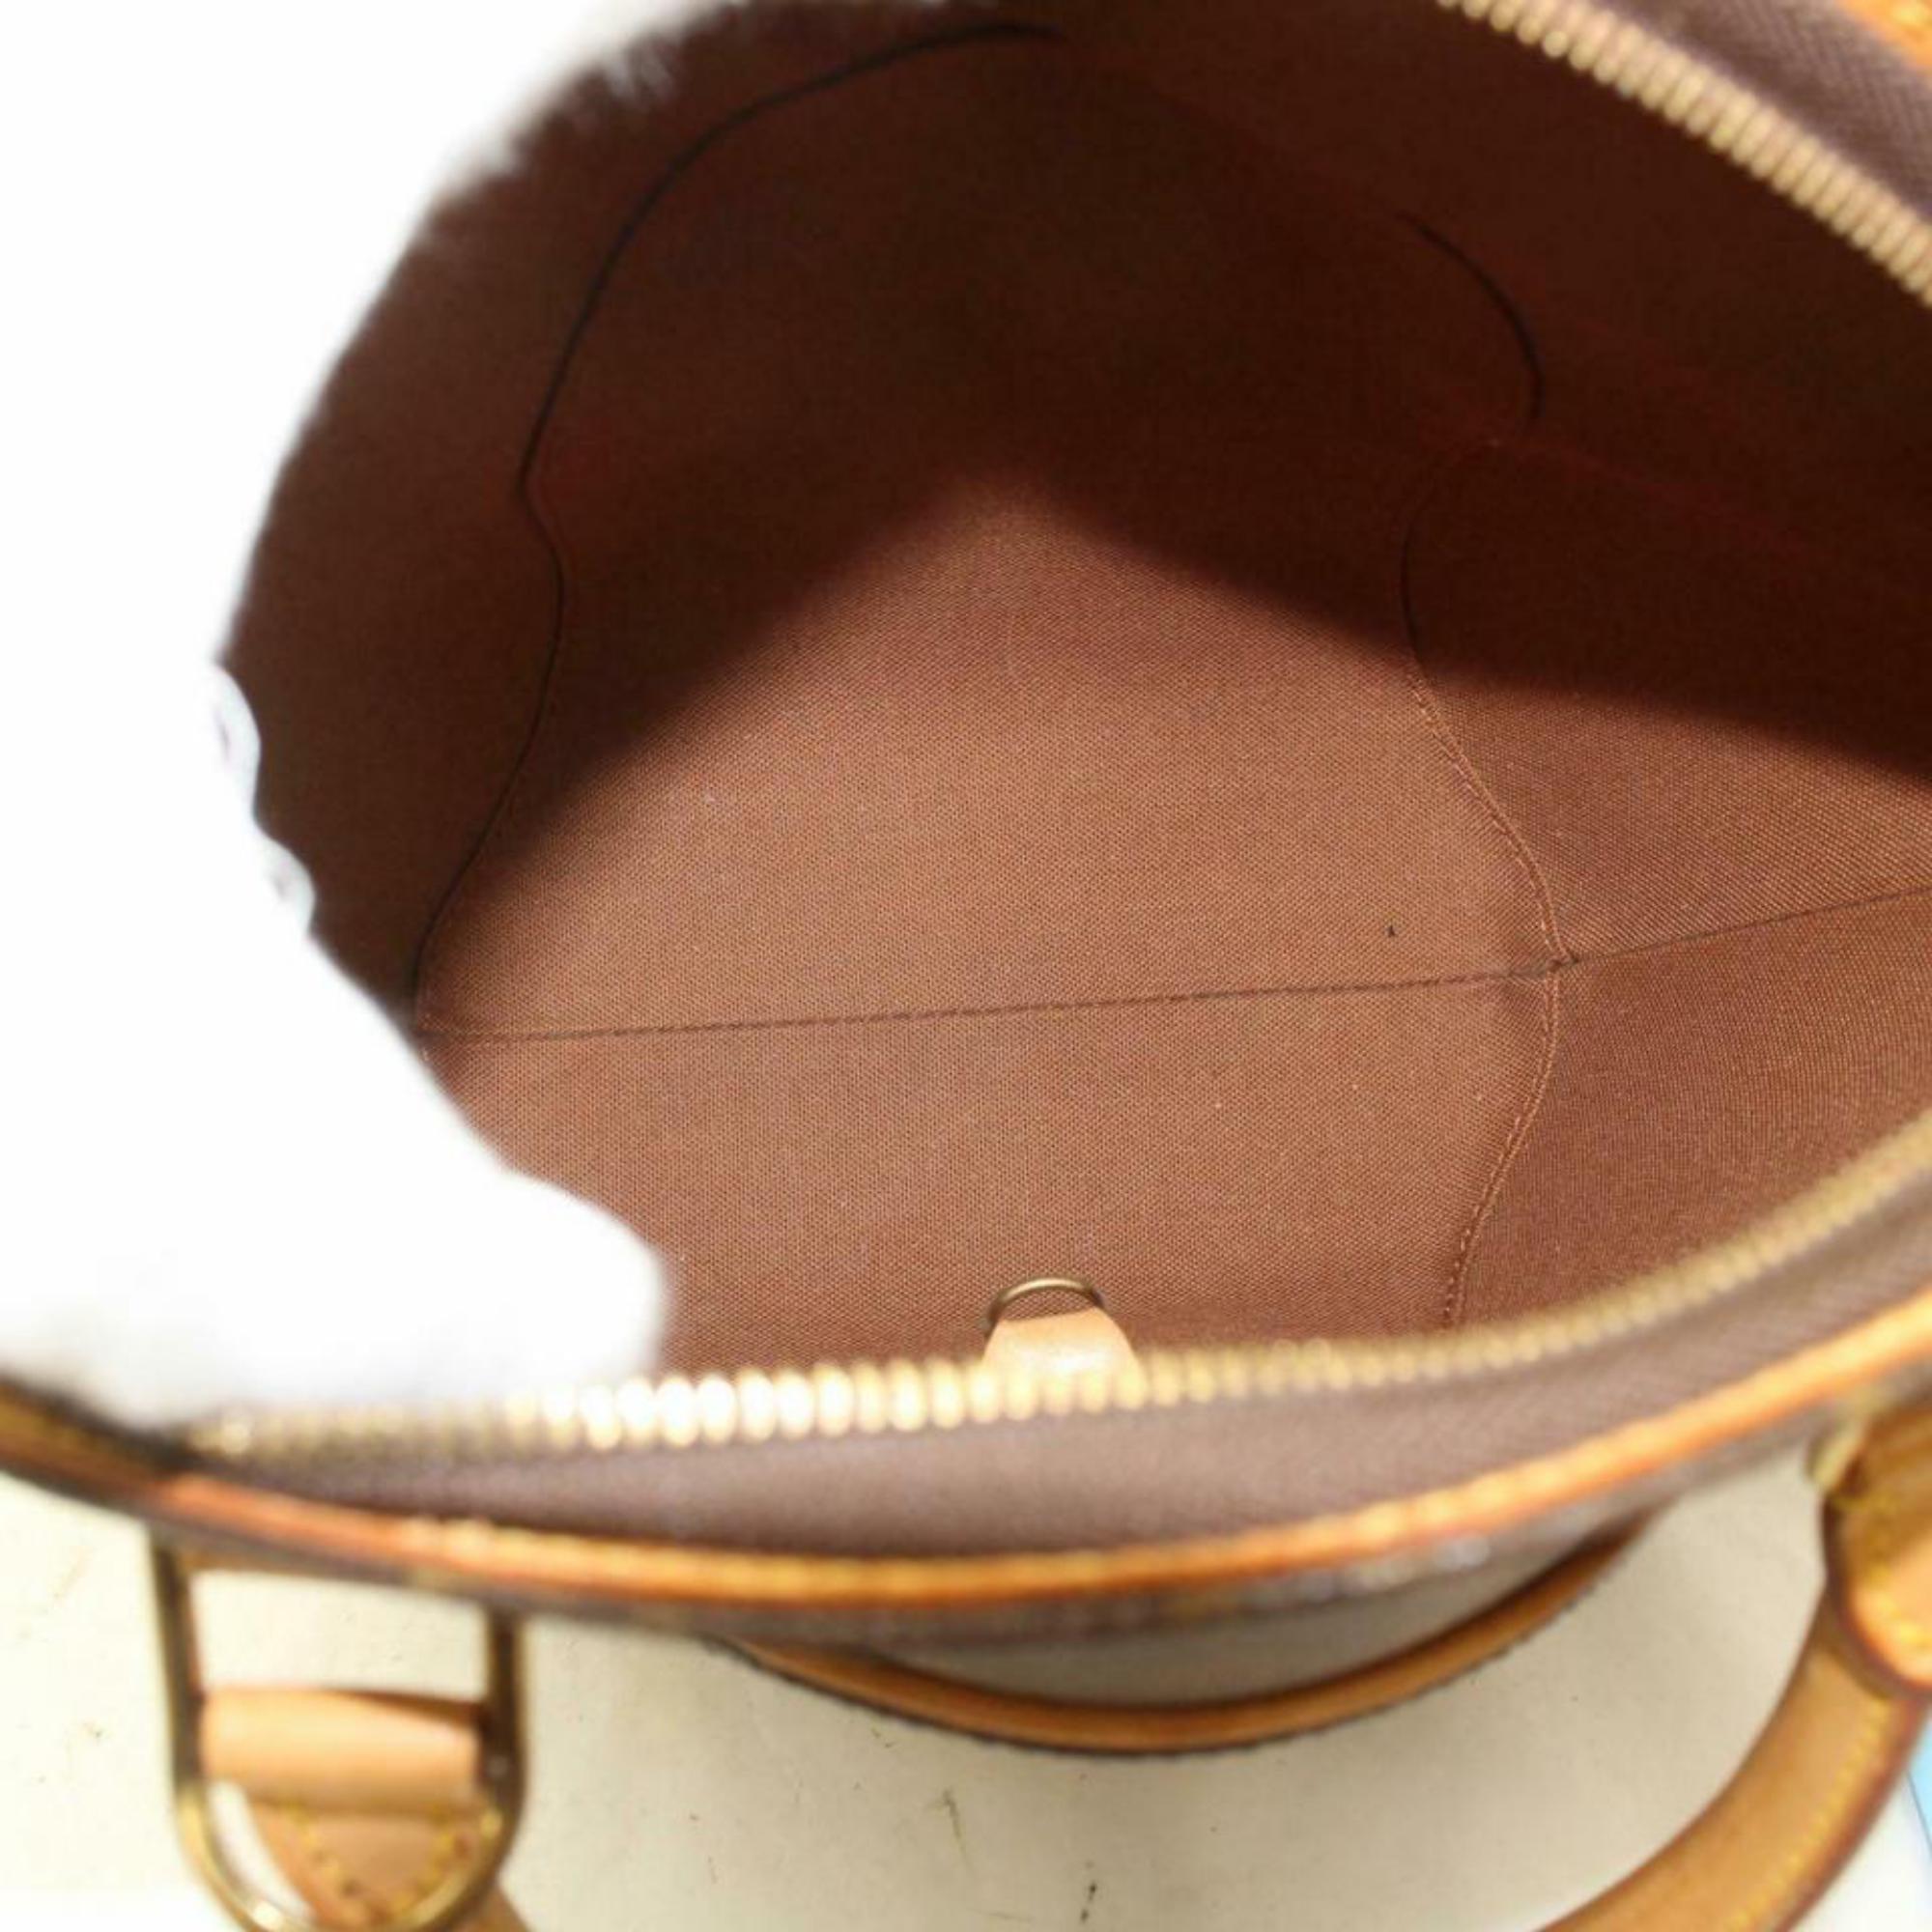 Louis Vuitton Ellipse Pm Octagon Sea Shell 870296 Brown Coated Canvas Satchel In Excellent Condition For Sale In Forest Hills, NY